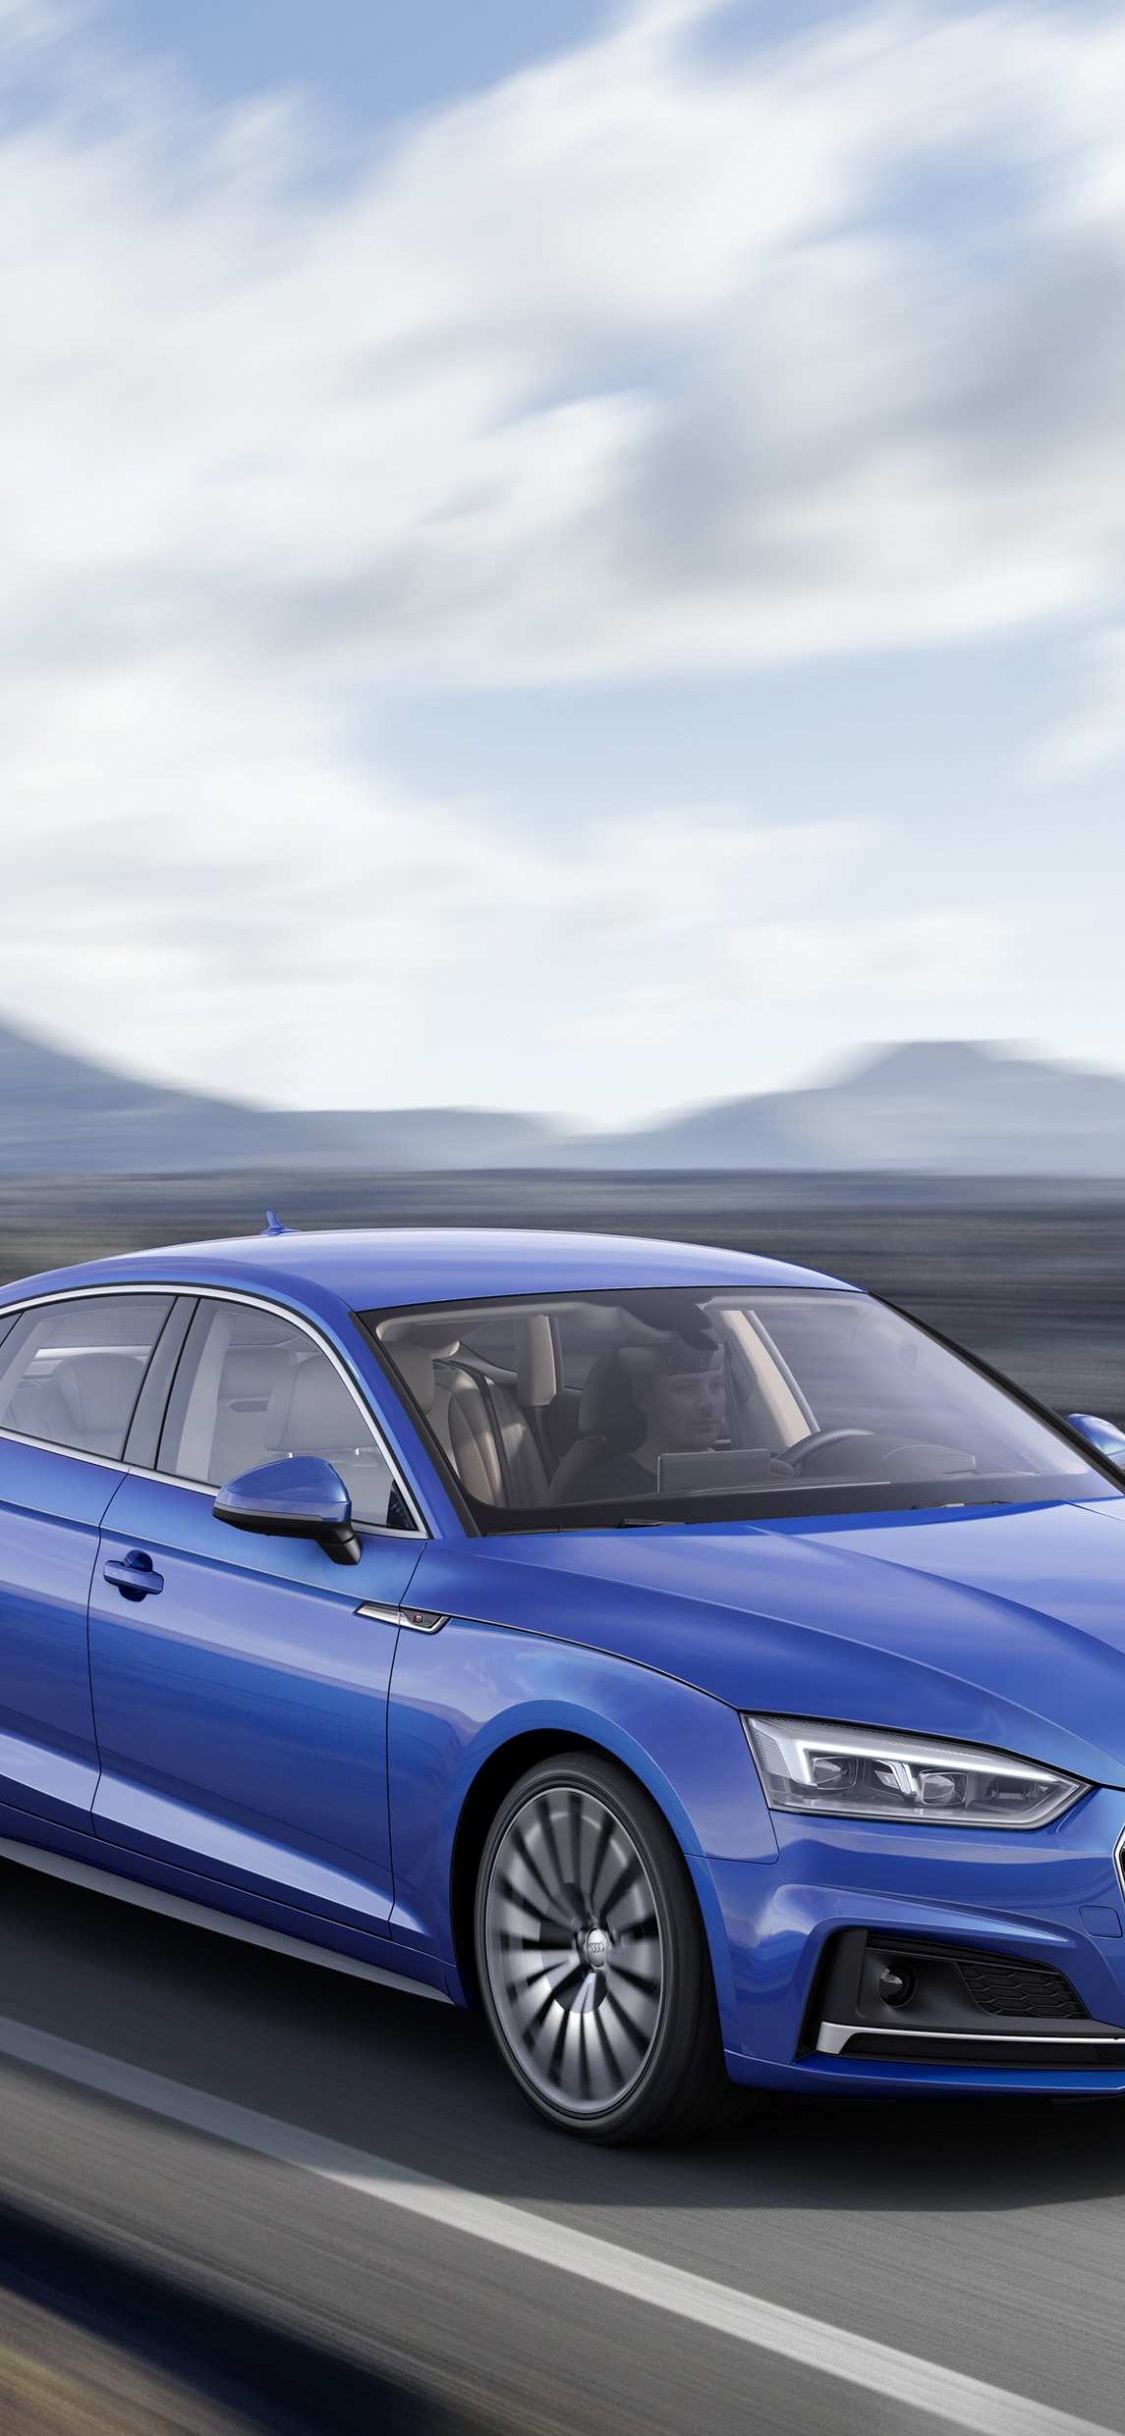 Blue Audi a 4 on Road During Daytime. Wallpaper in 1125x2436 Resolution